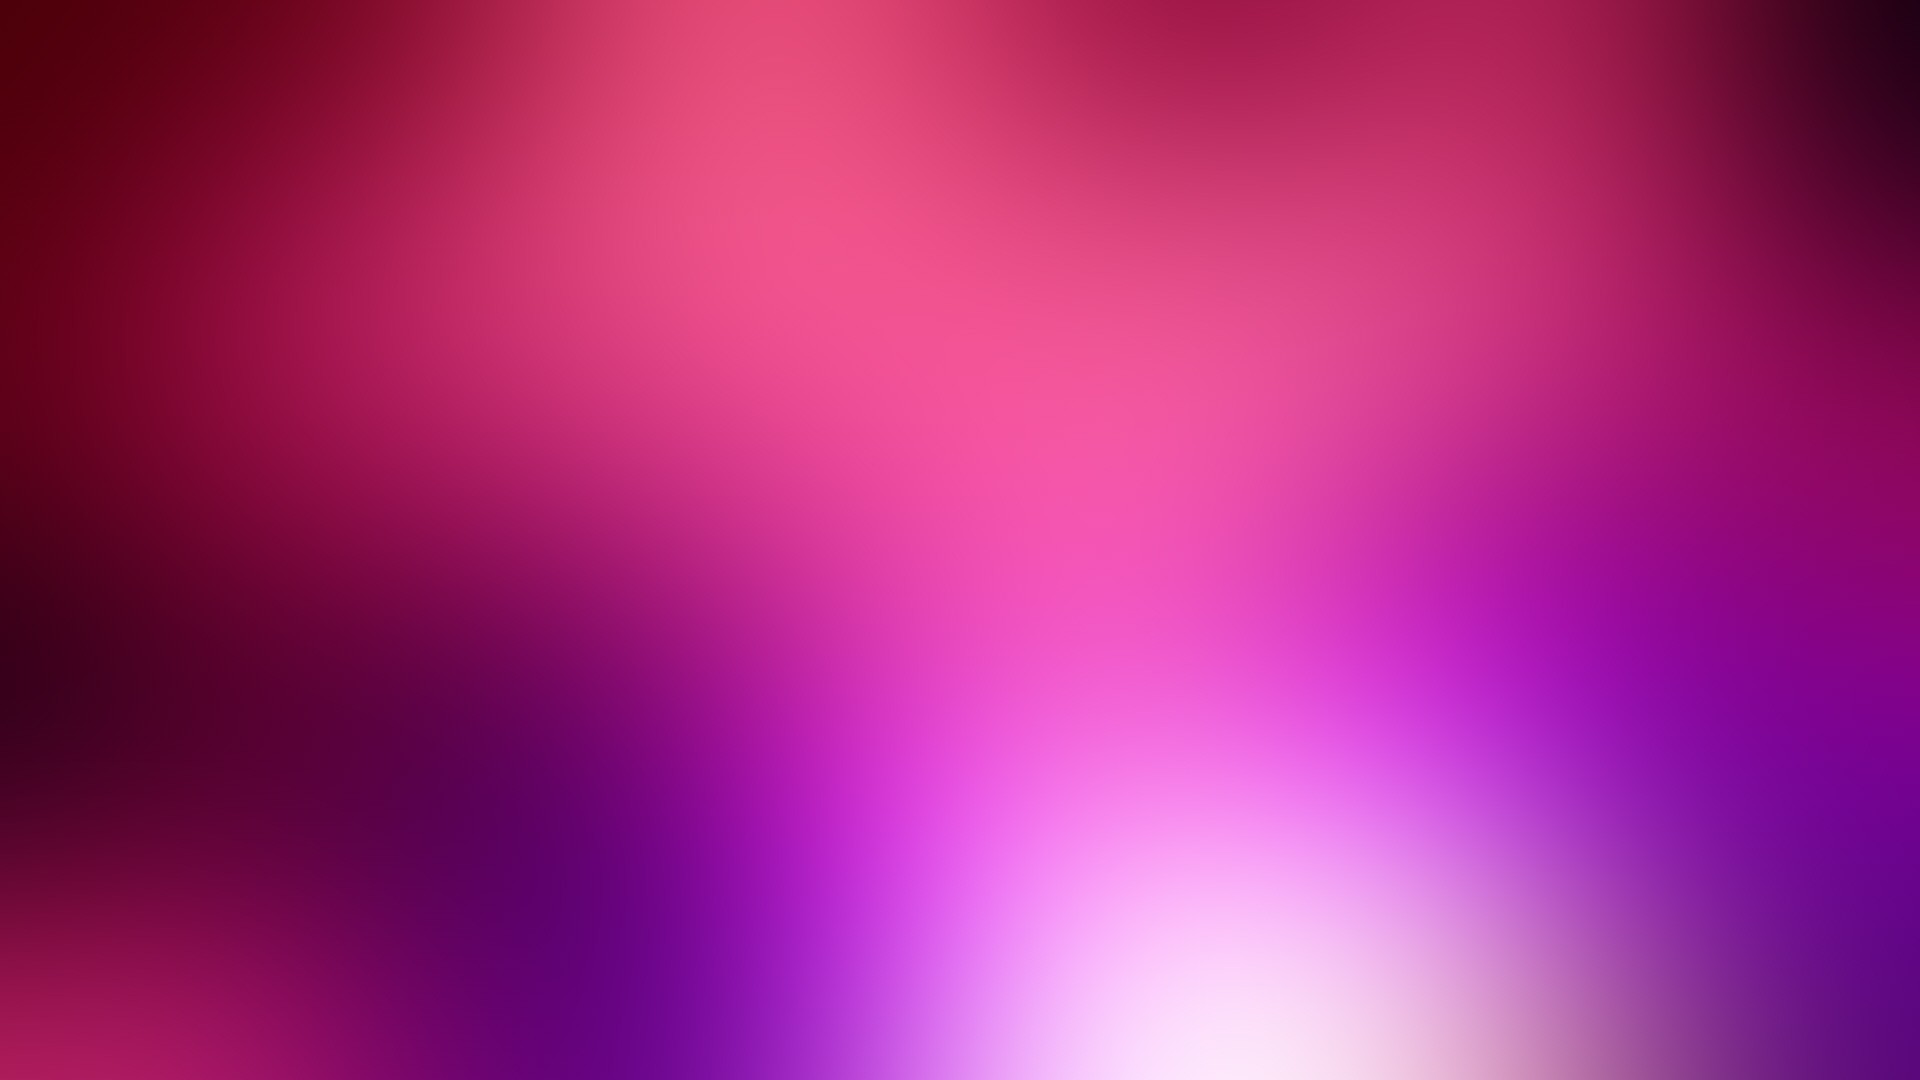 pink and purple wallpaper,violet,purple,pink,blue,red